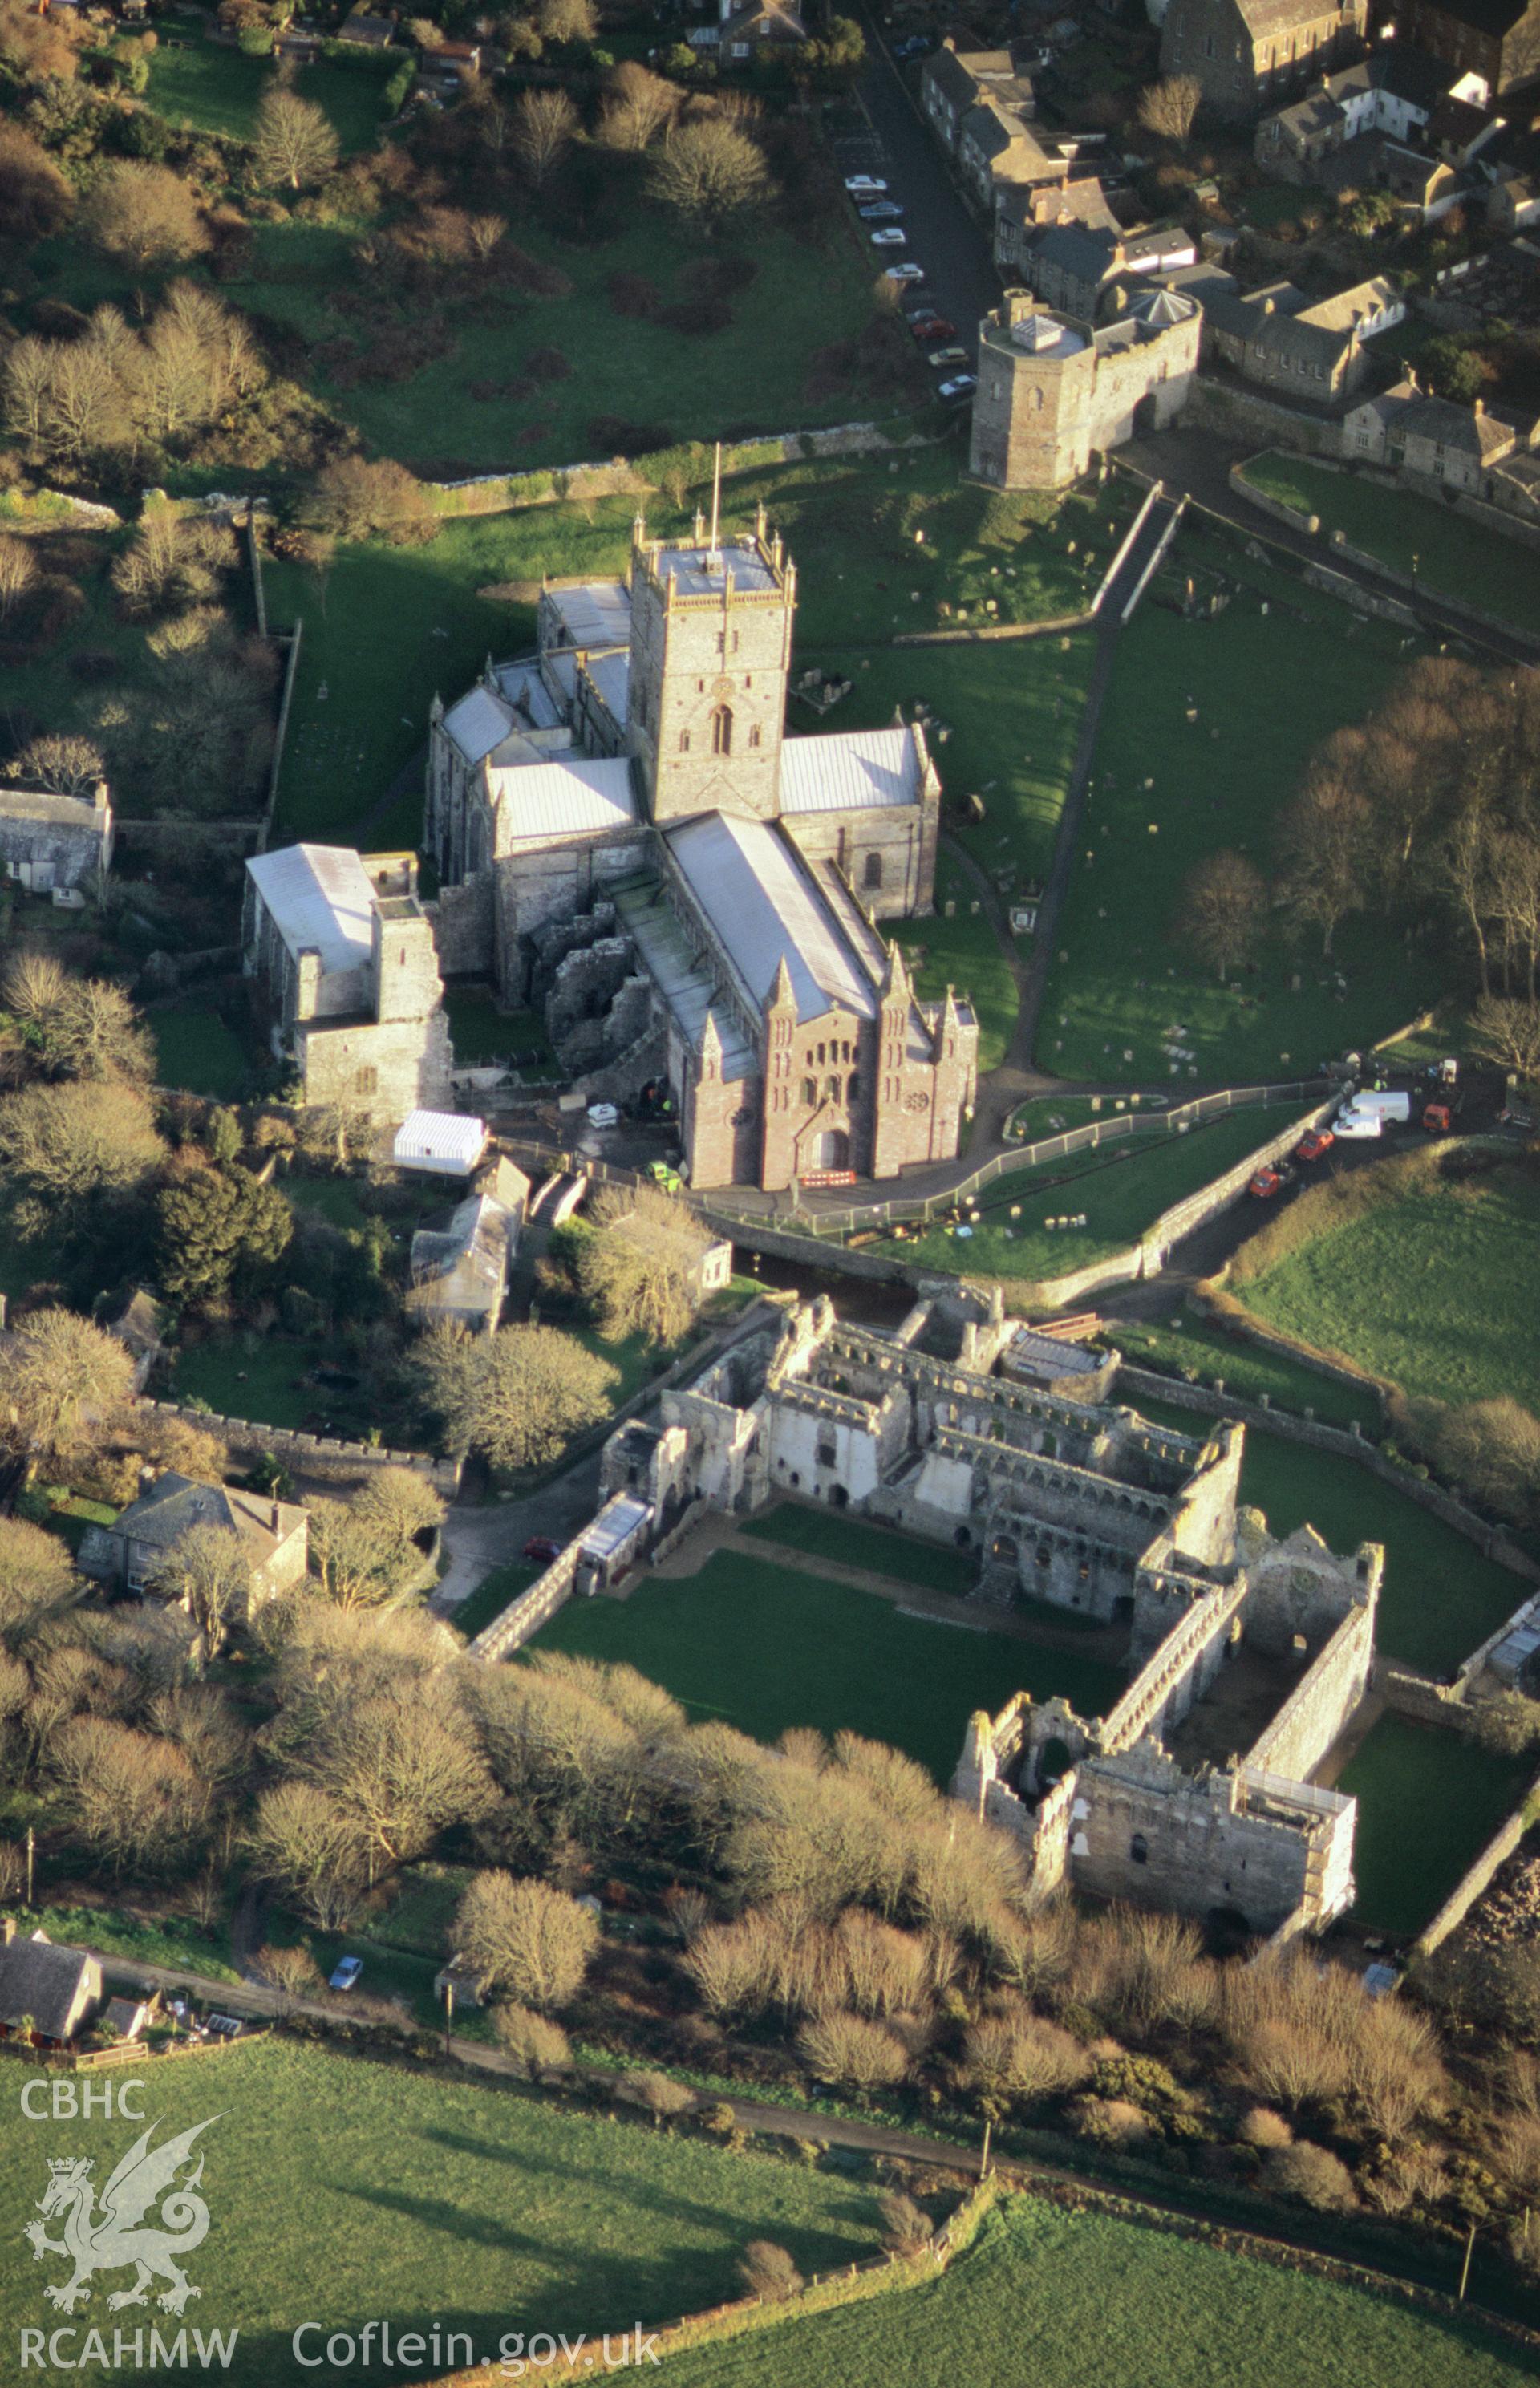 Slide of RCAHMW colour oblique aerial photograph of St David's Cathedral, taken by T.G. Driver, 2005.